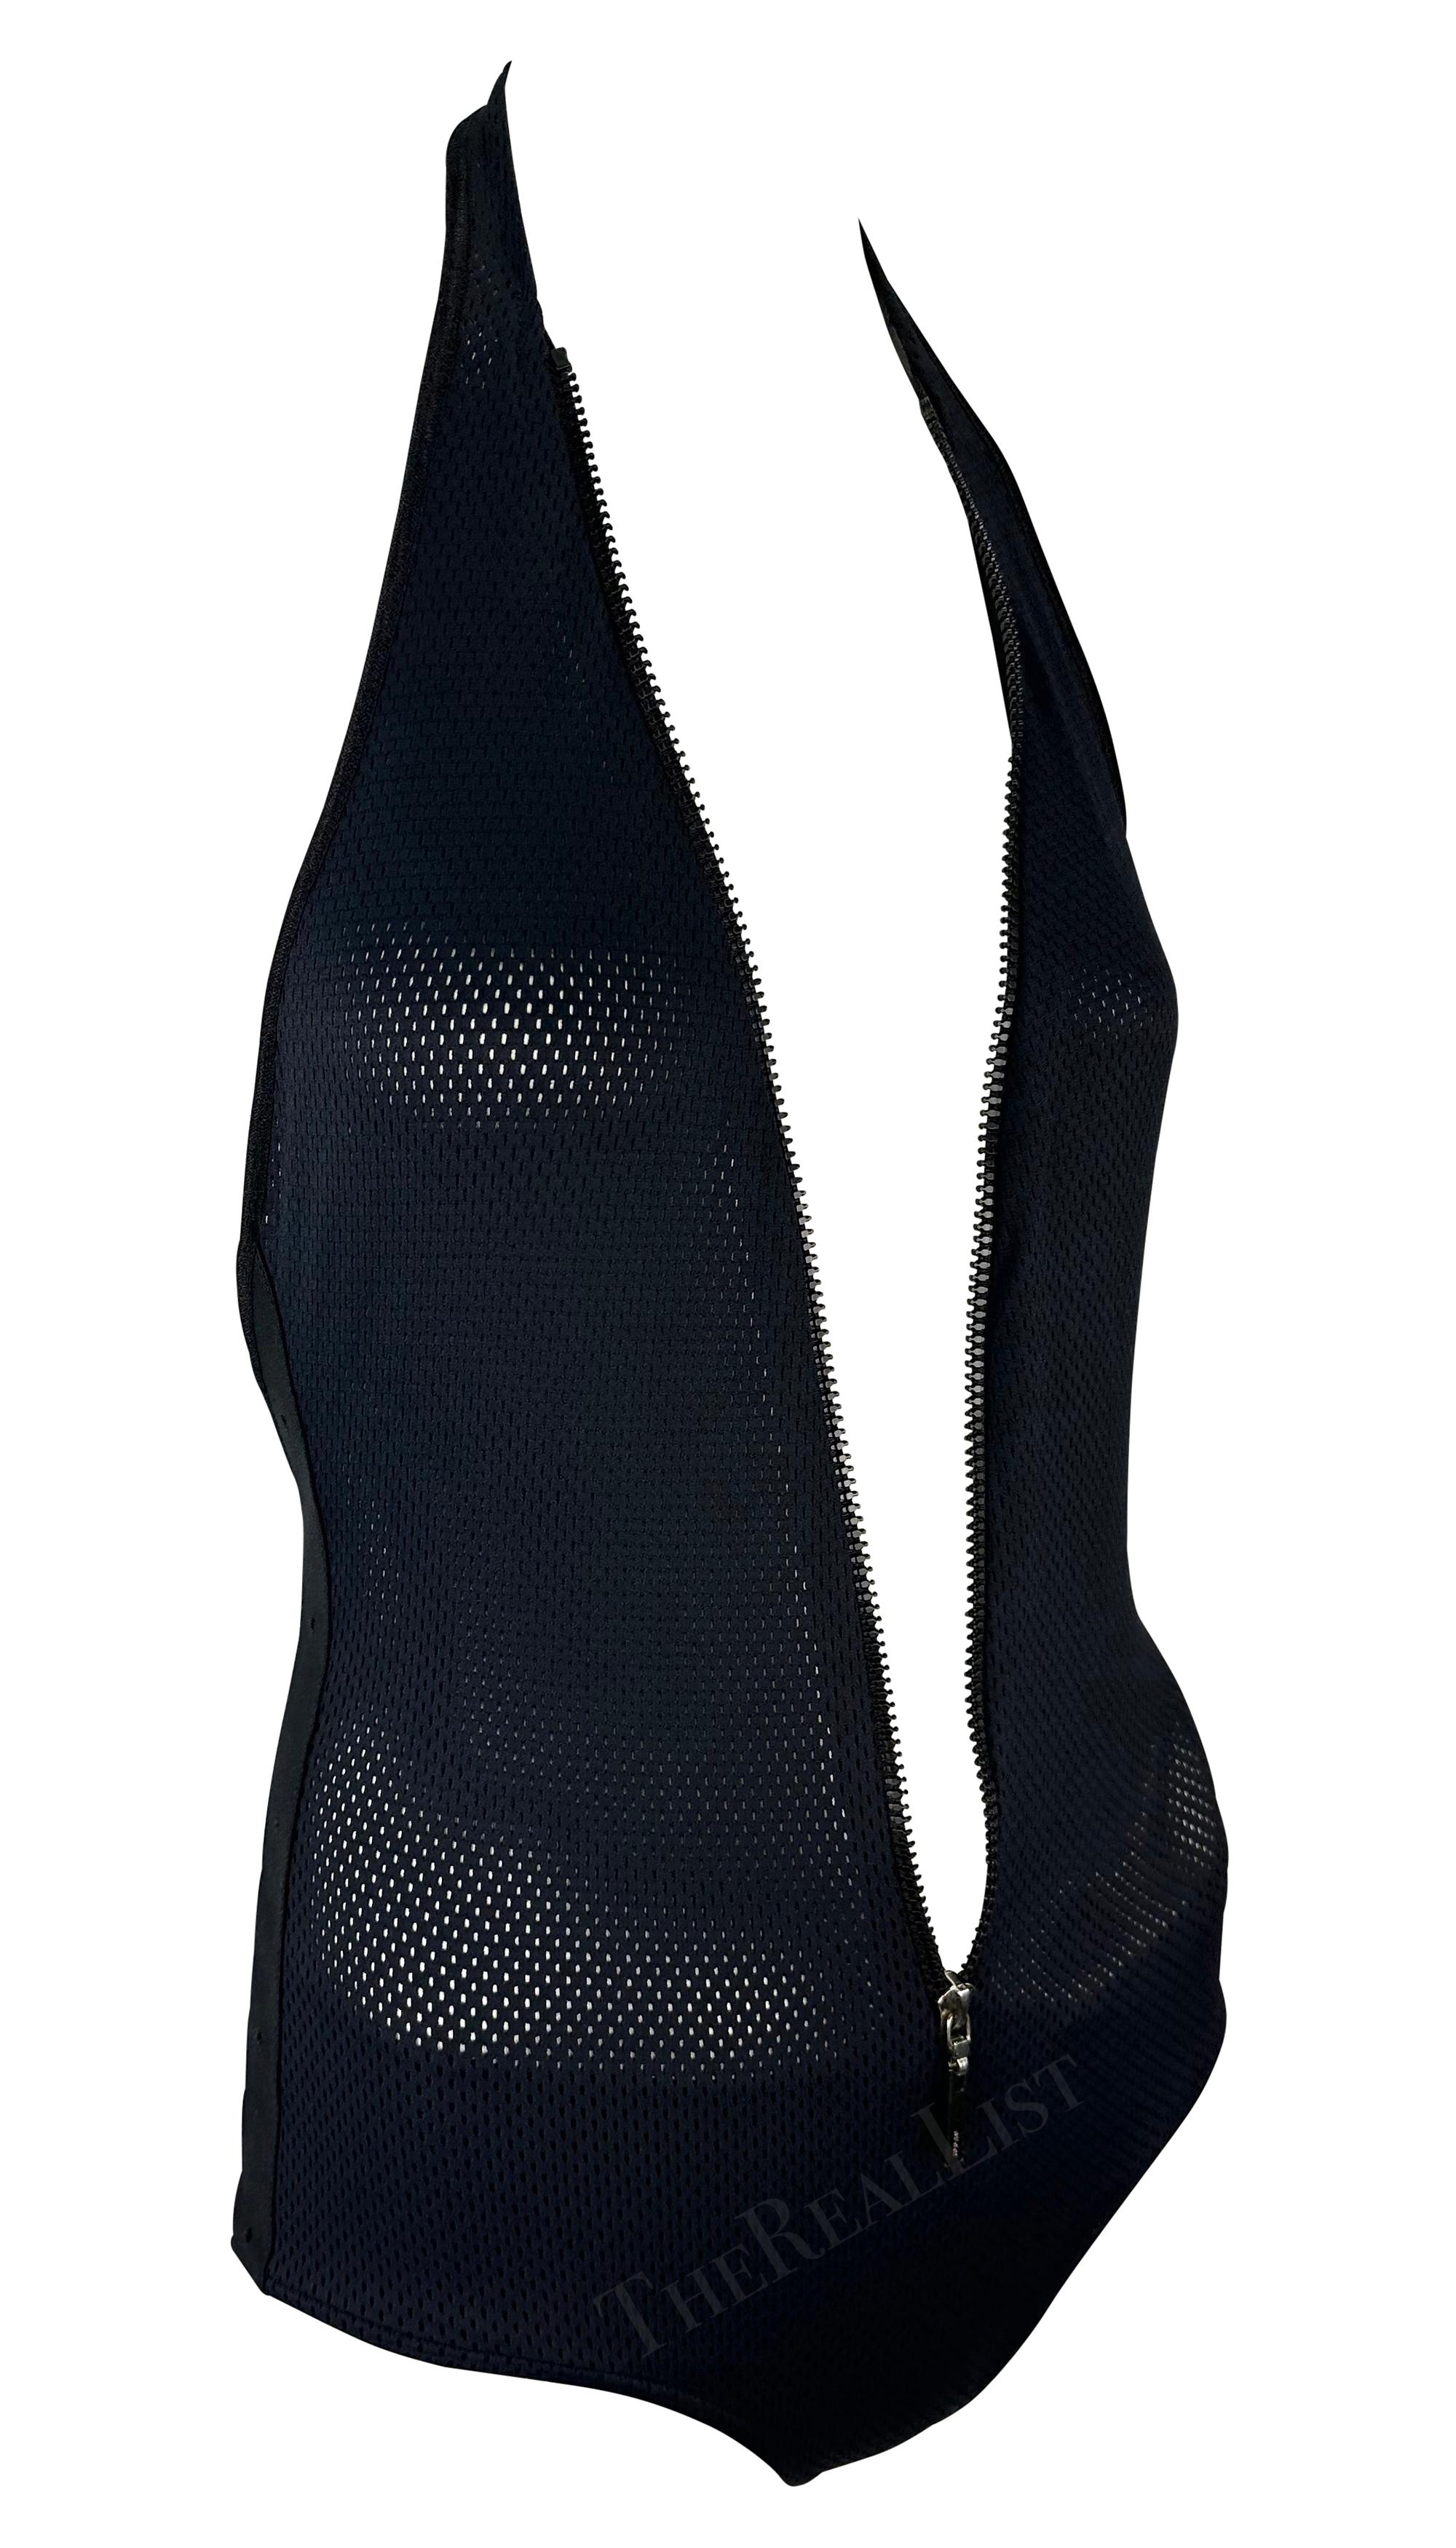 S/S 2002 Gucci by Tom Ford Sheer Mesh Zip-Up Plunging Halter One-Piece Swimsuit For Sale 3